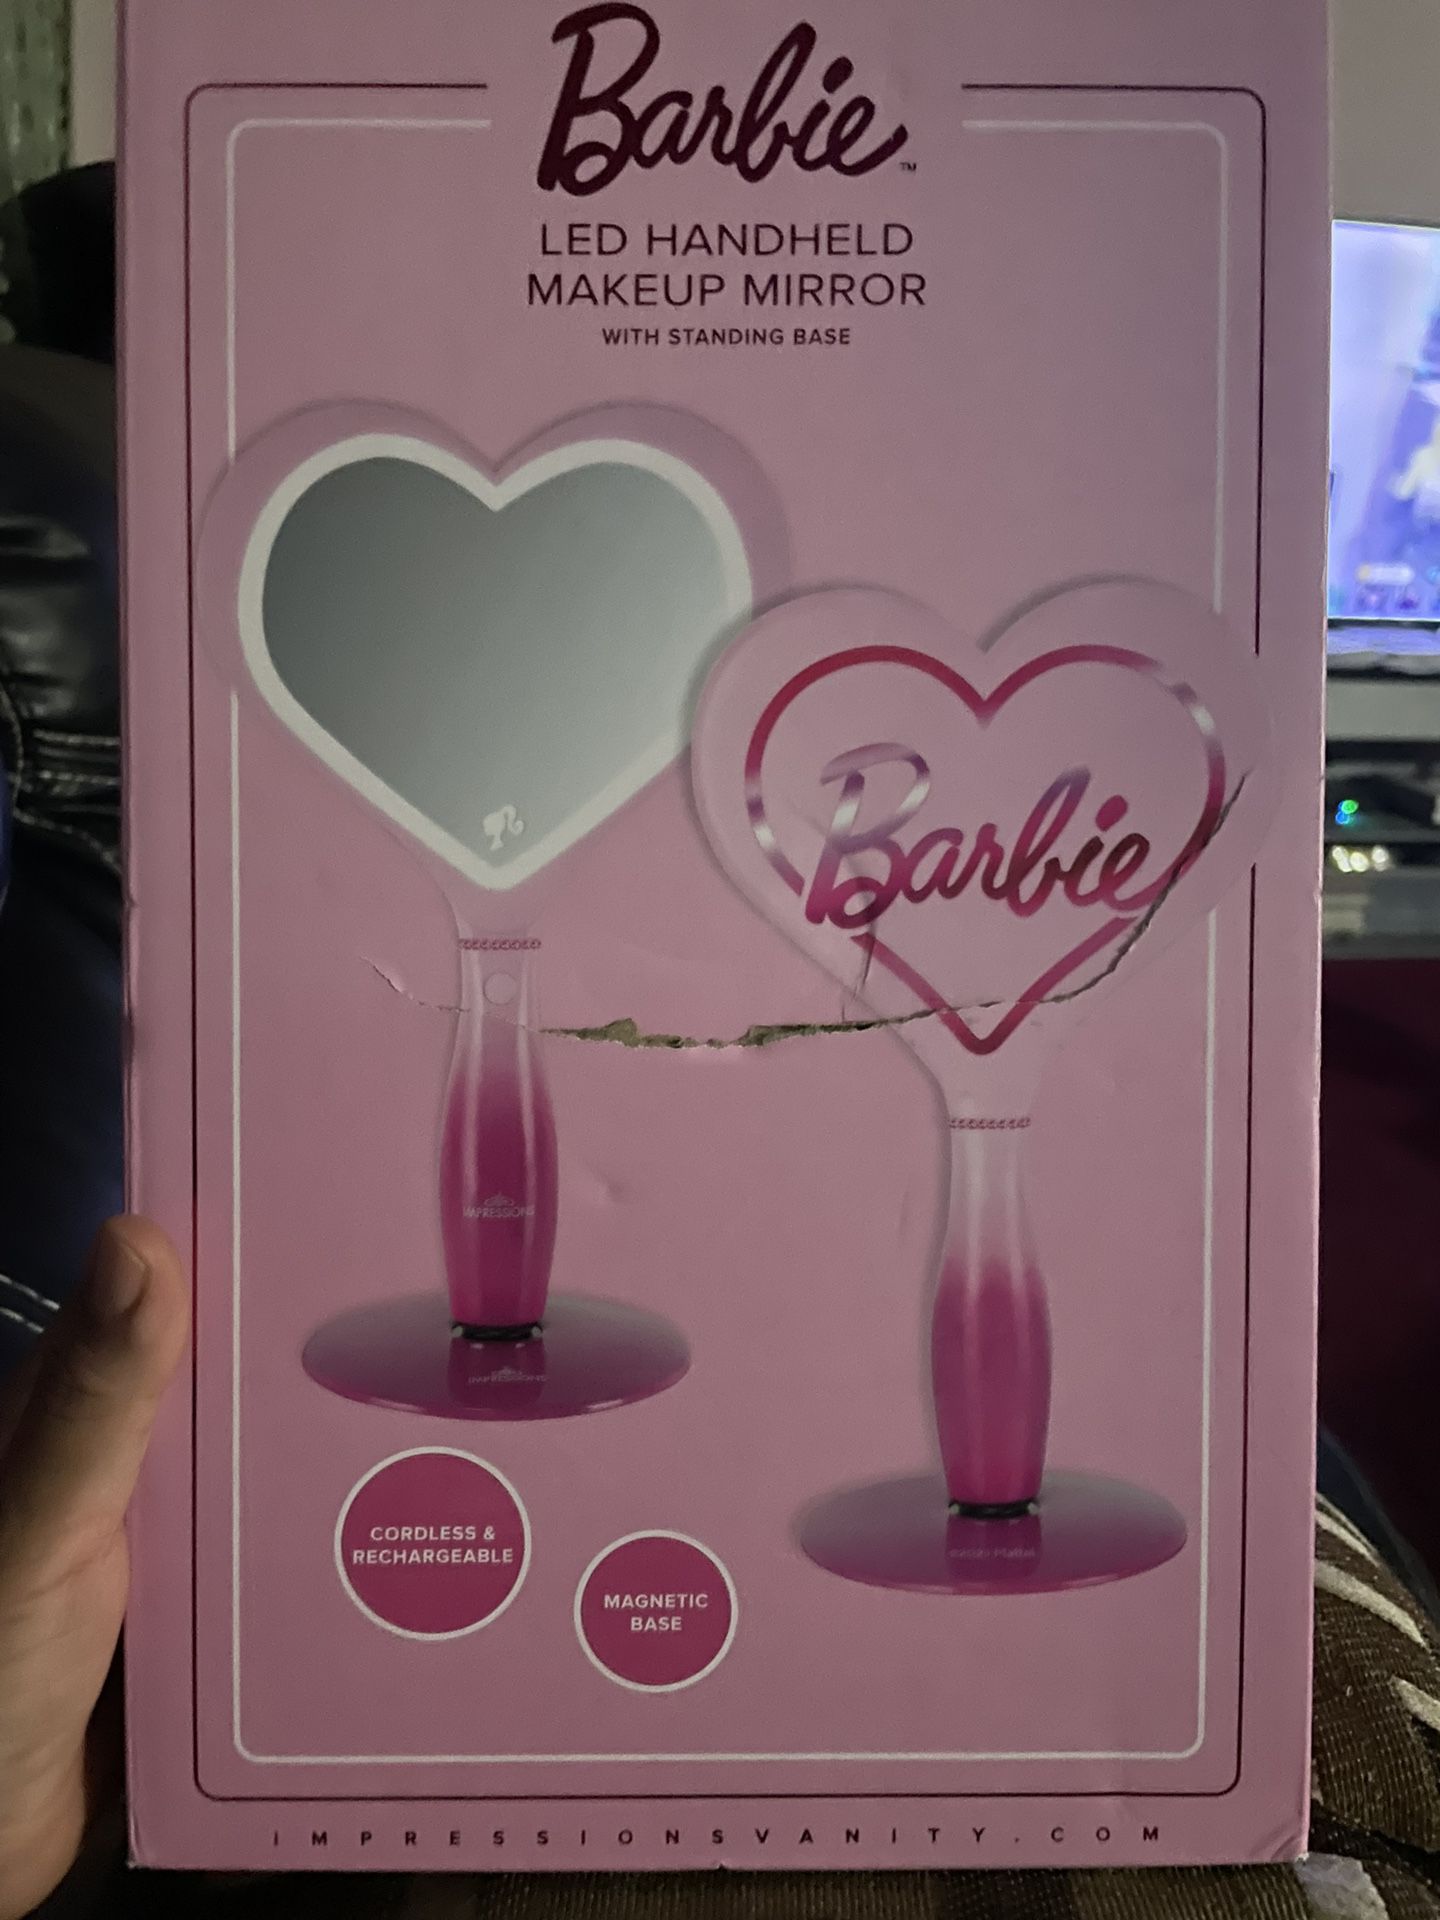 Barbie LED Handheld Makeup Mirror With Standing Base (New / Rechargeable) NIB pick up location in the city of Pico Rivera 